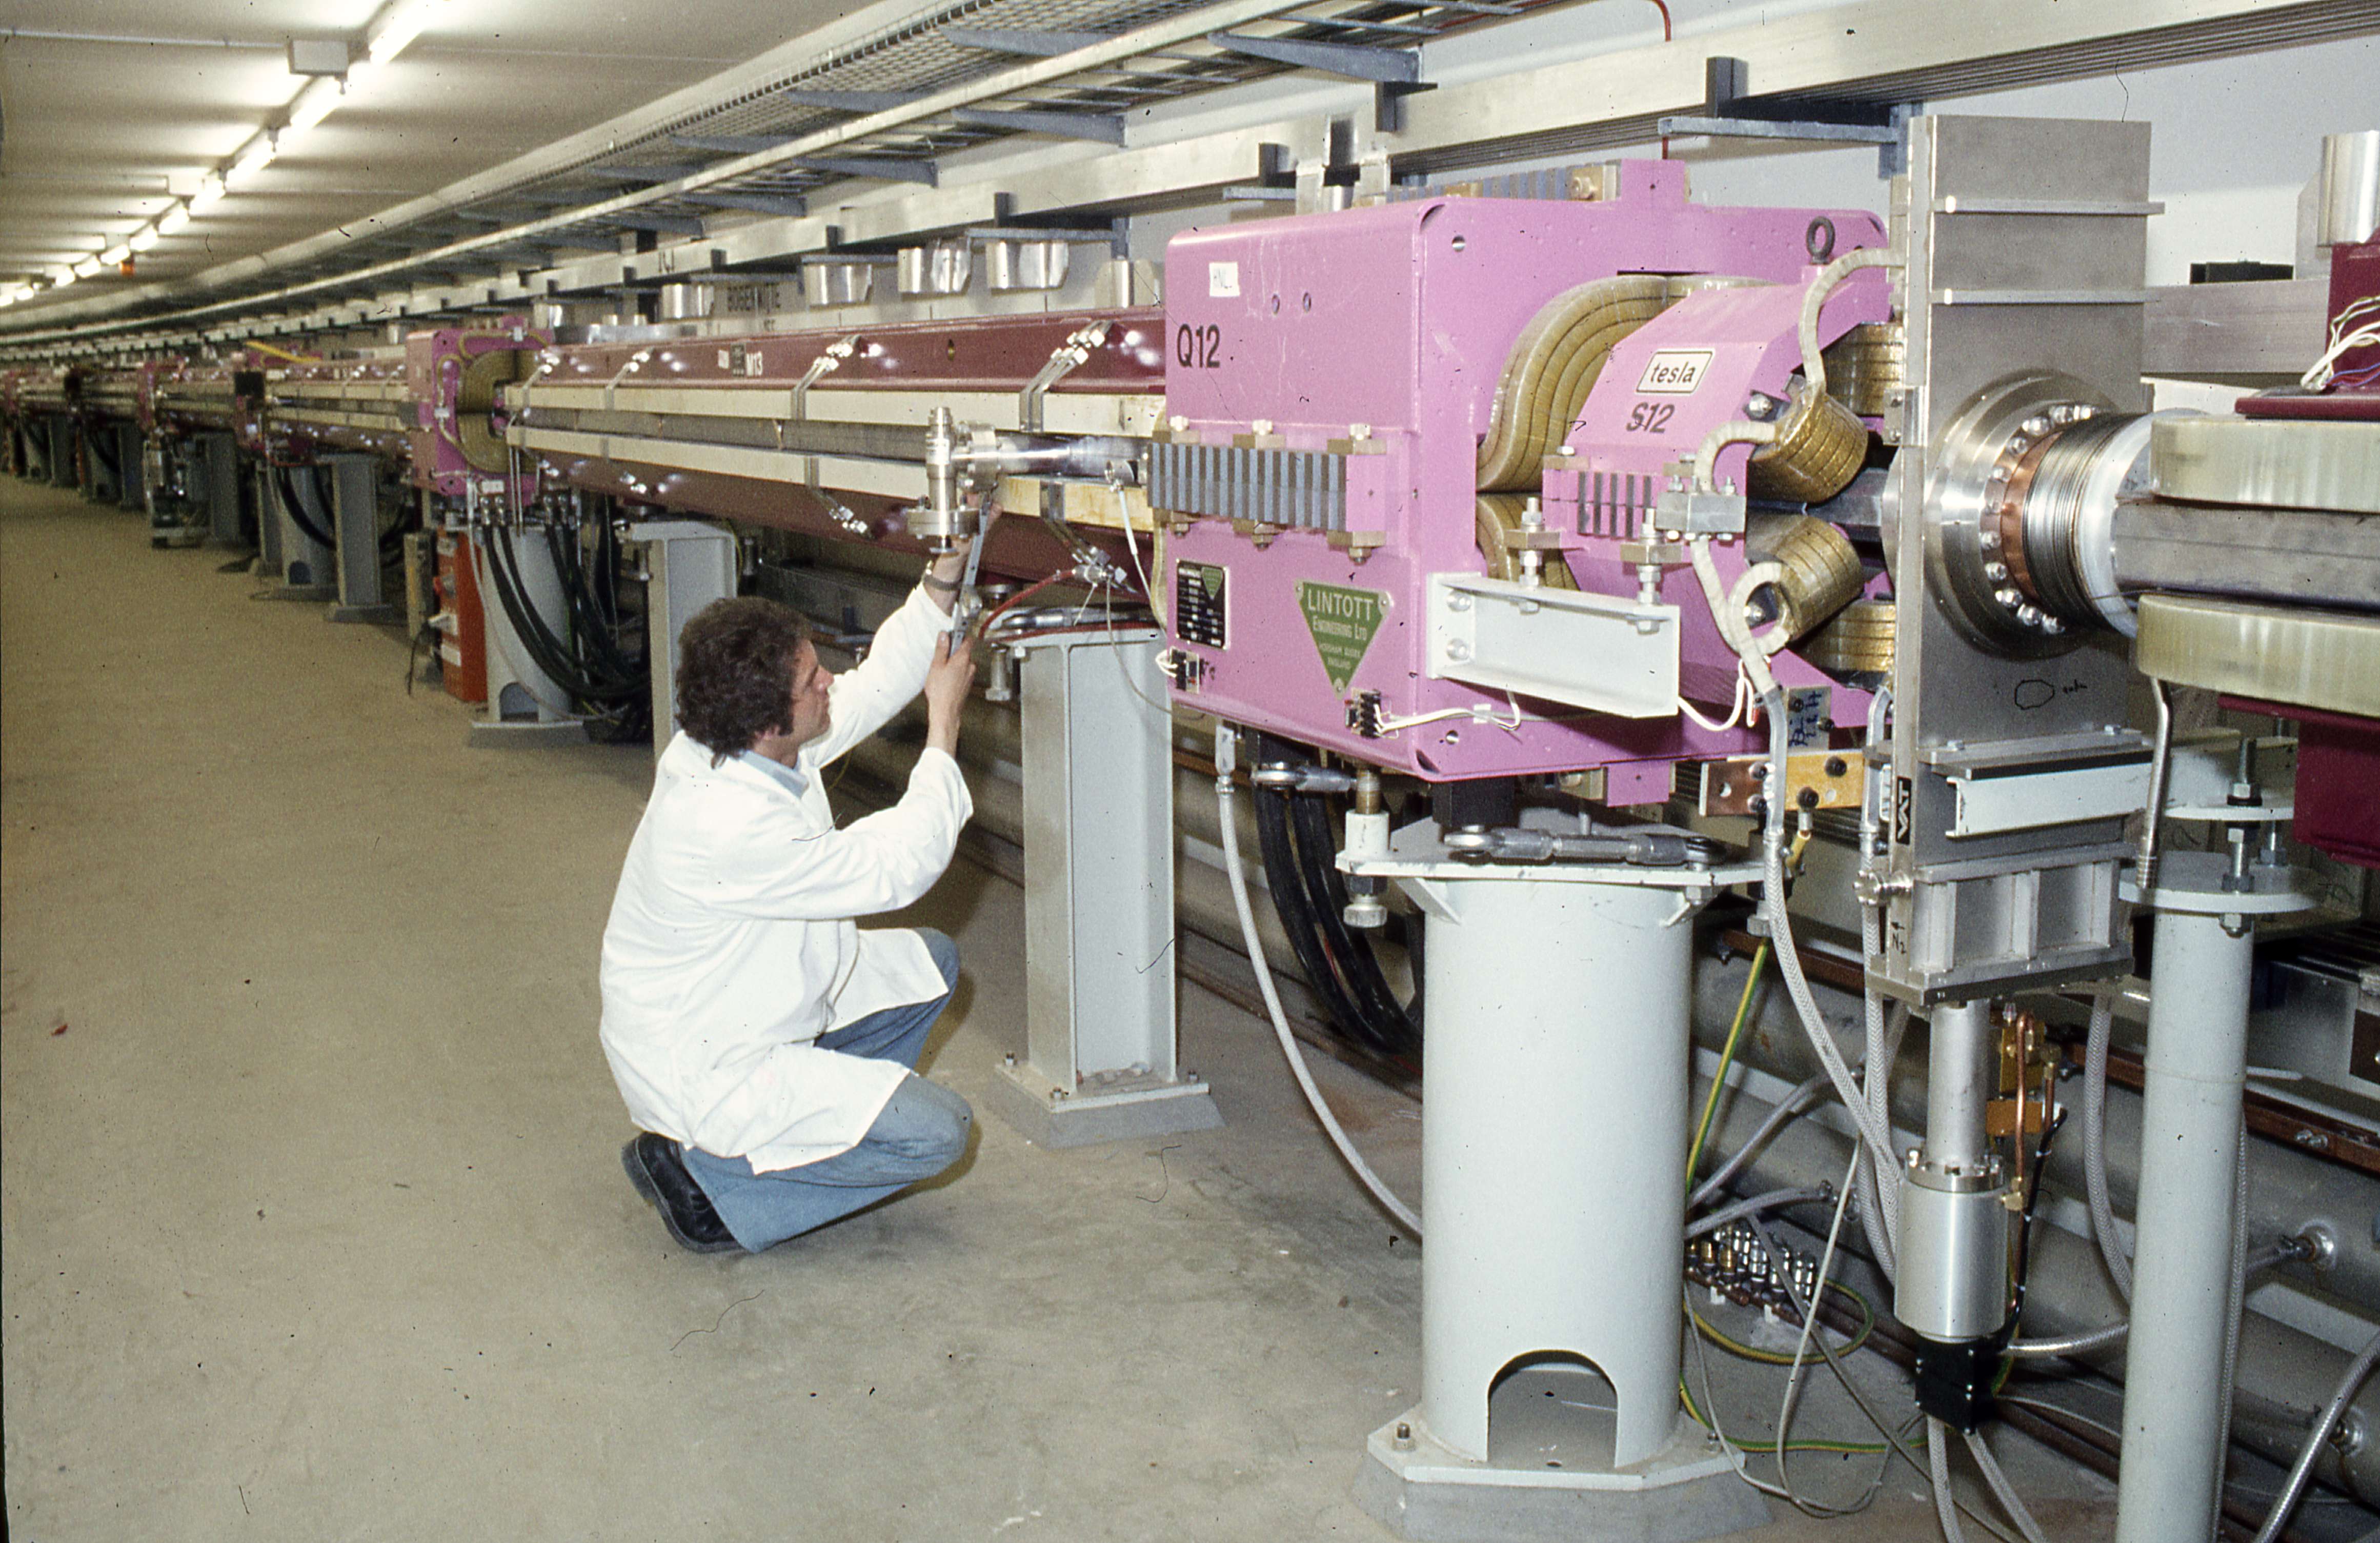 A person crouches down in a white lab coat and jeans and inspects the PETRA accelerator at DESY.